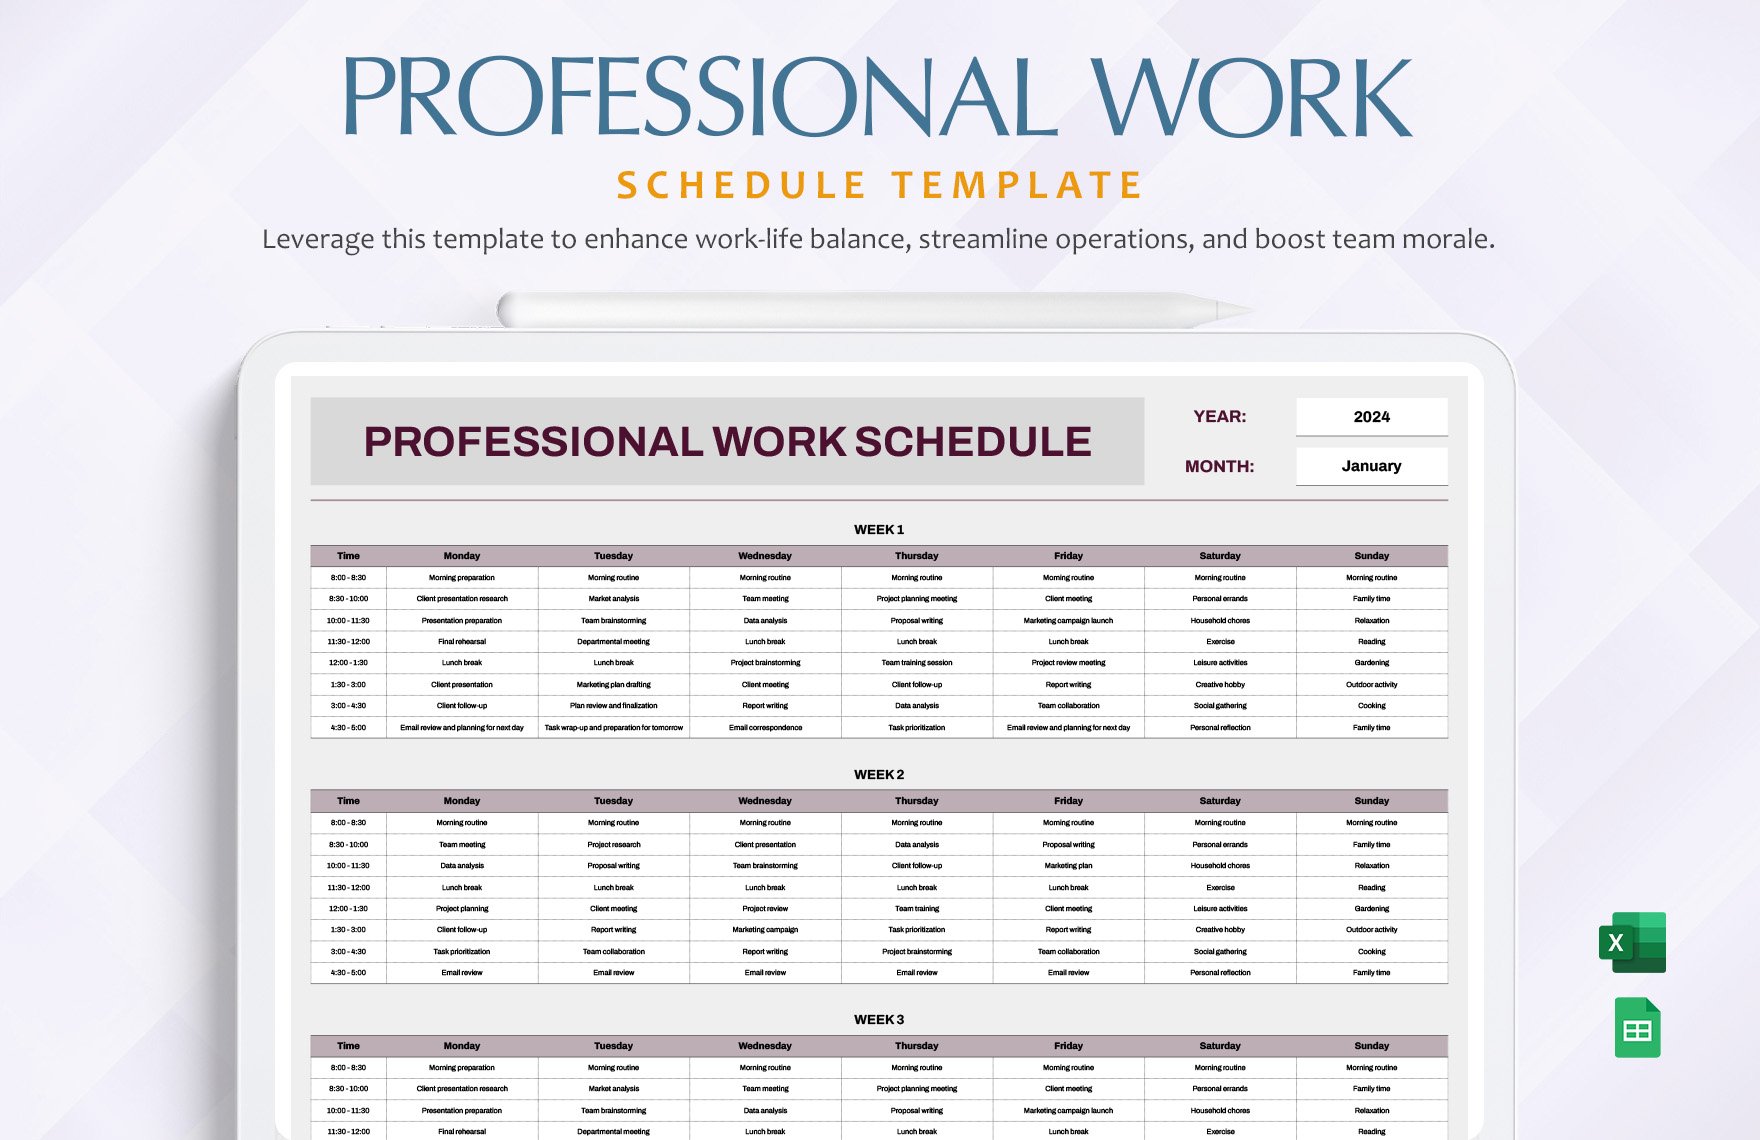 Professional Work Schedule Template in Excel, Google Sheets